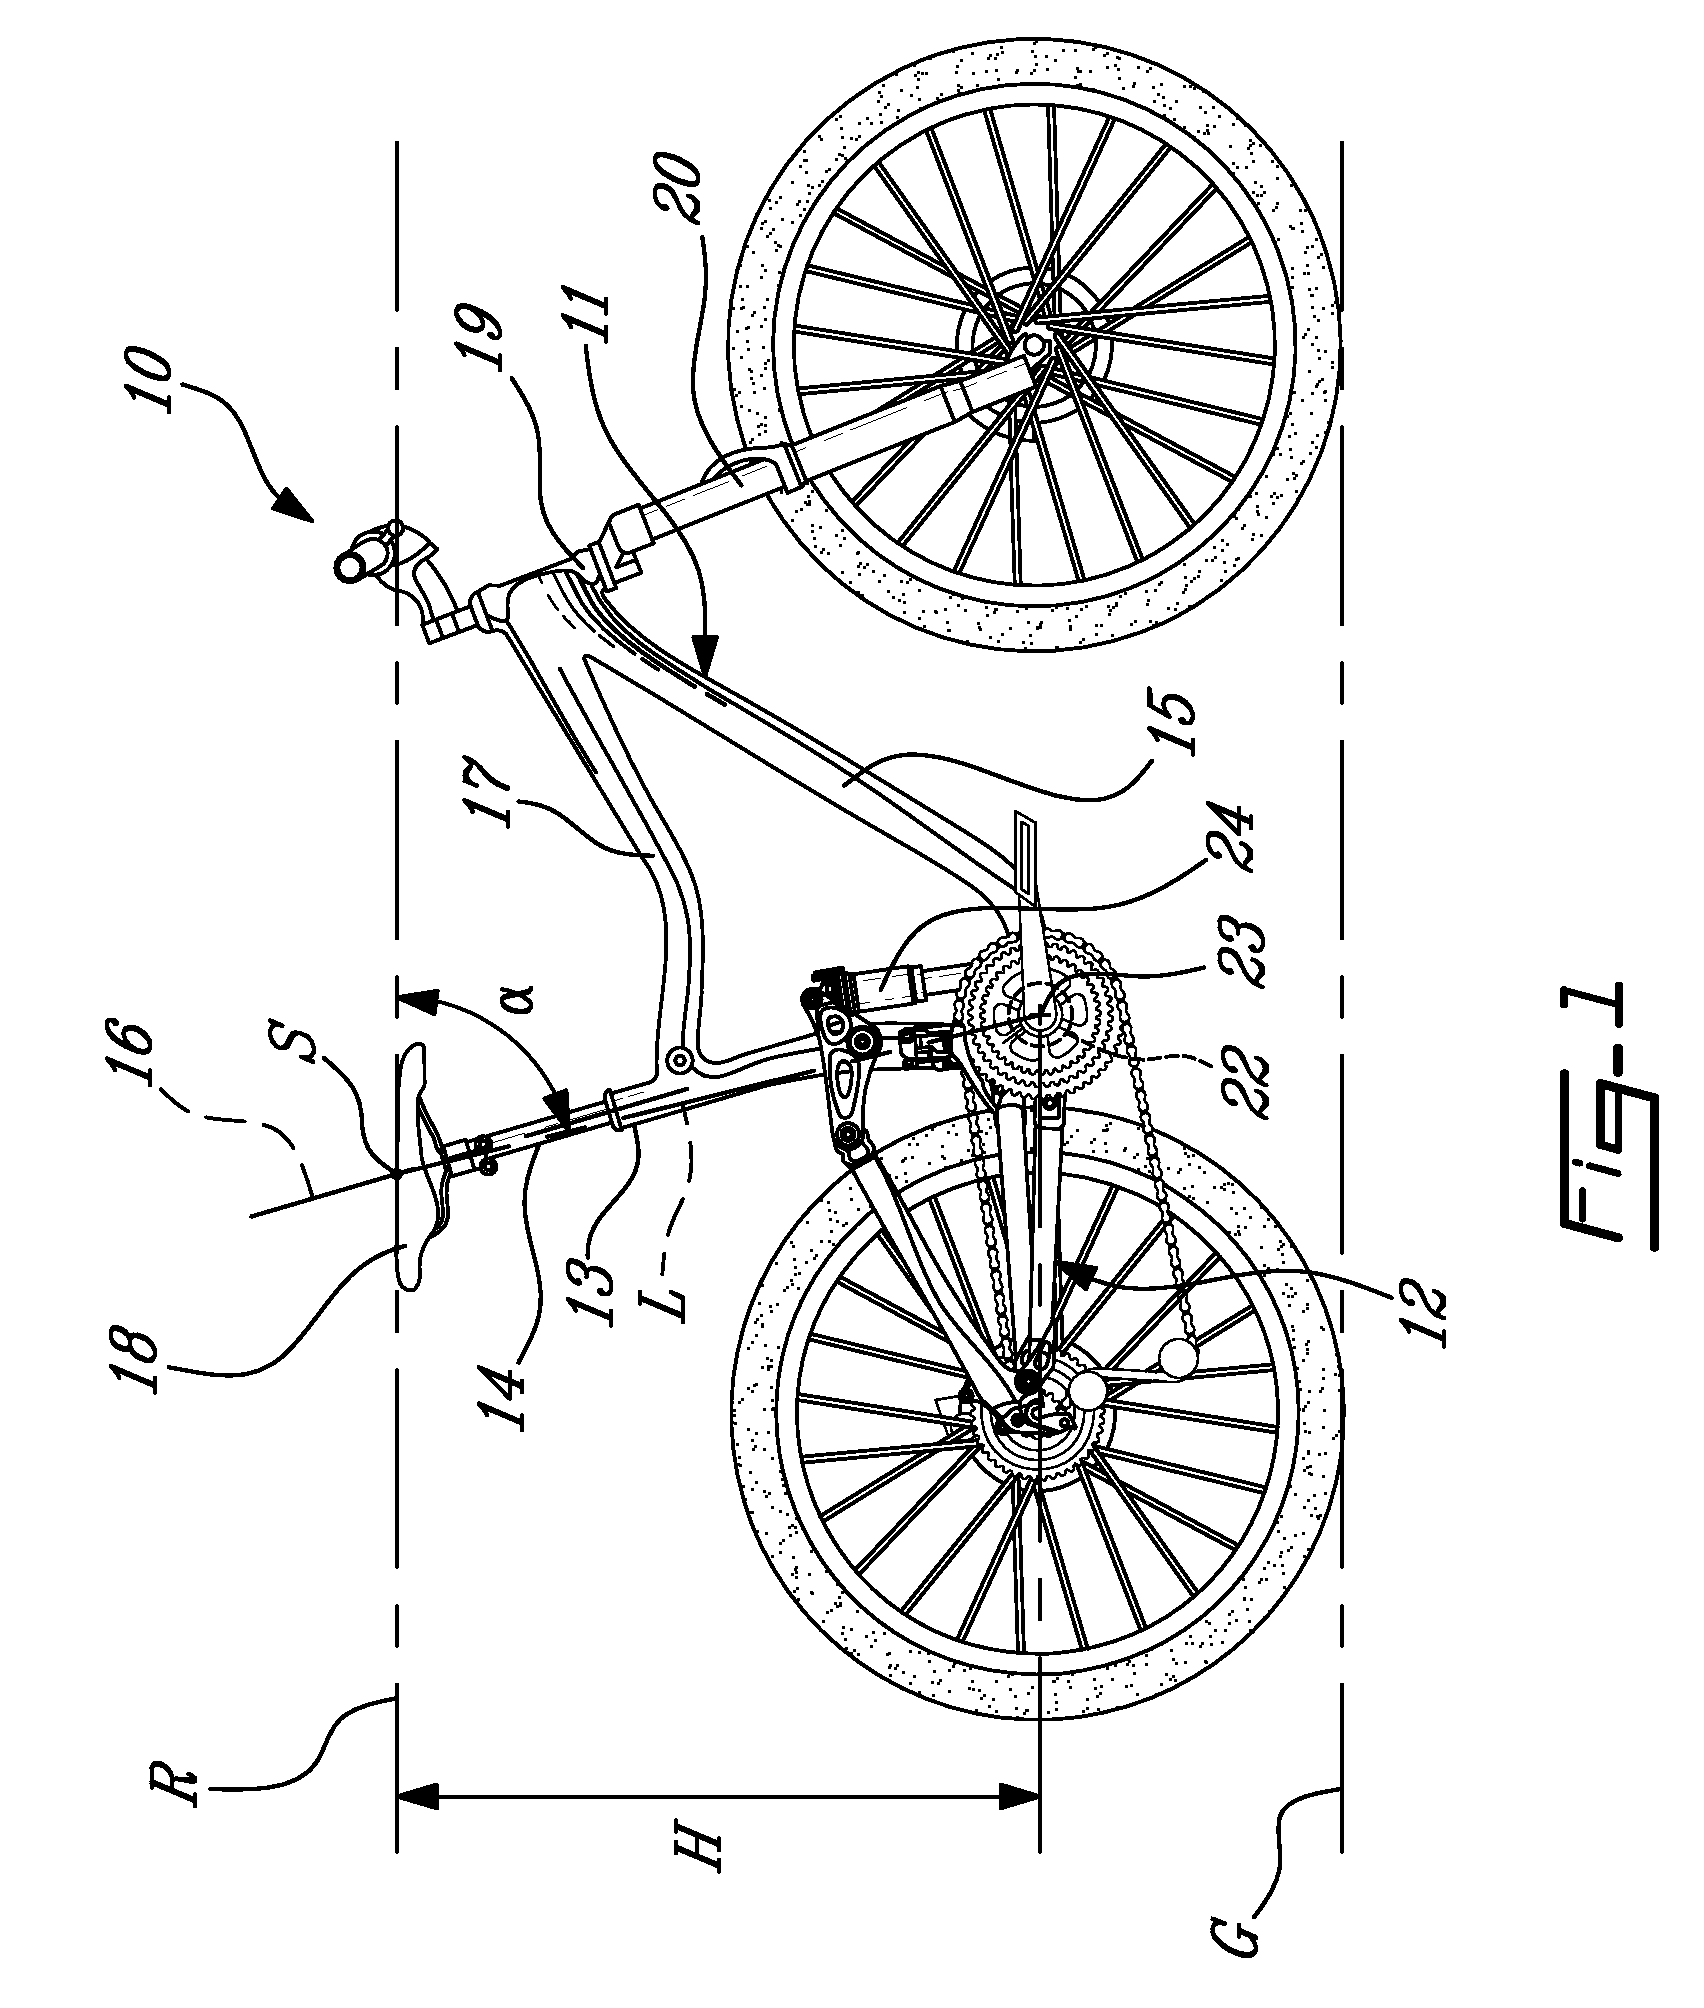 Mountain bicycle having improved frame geometry